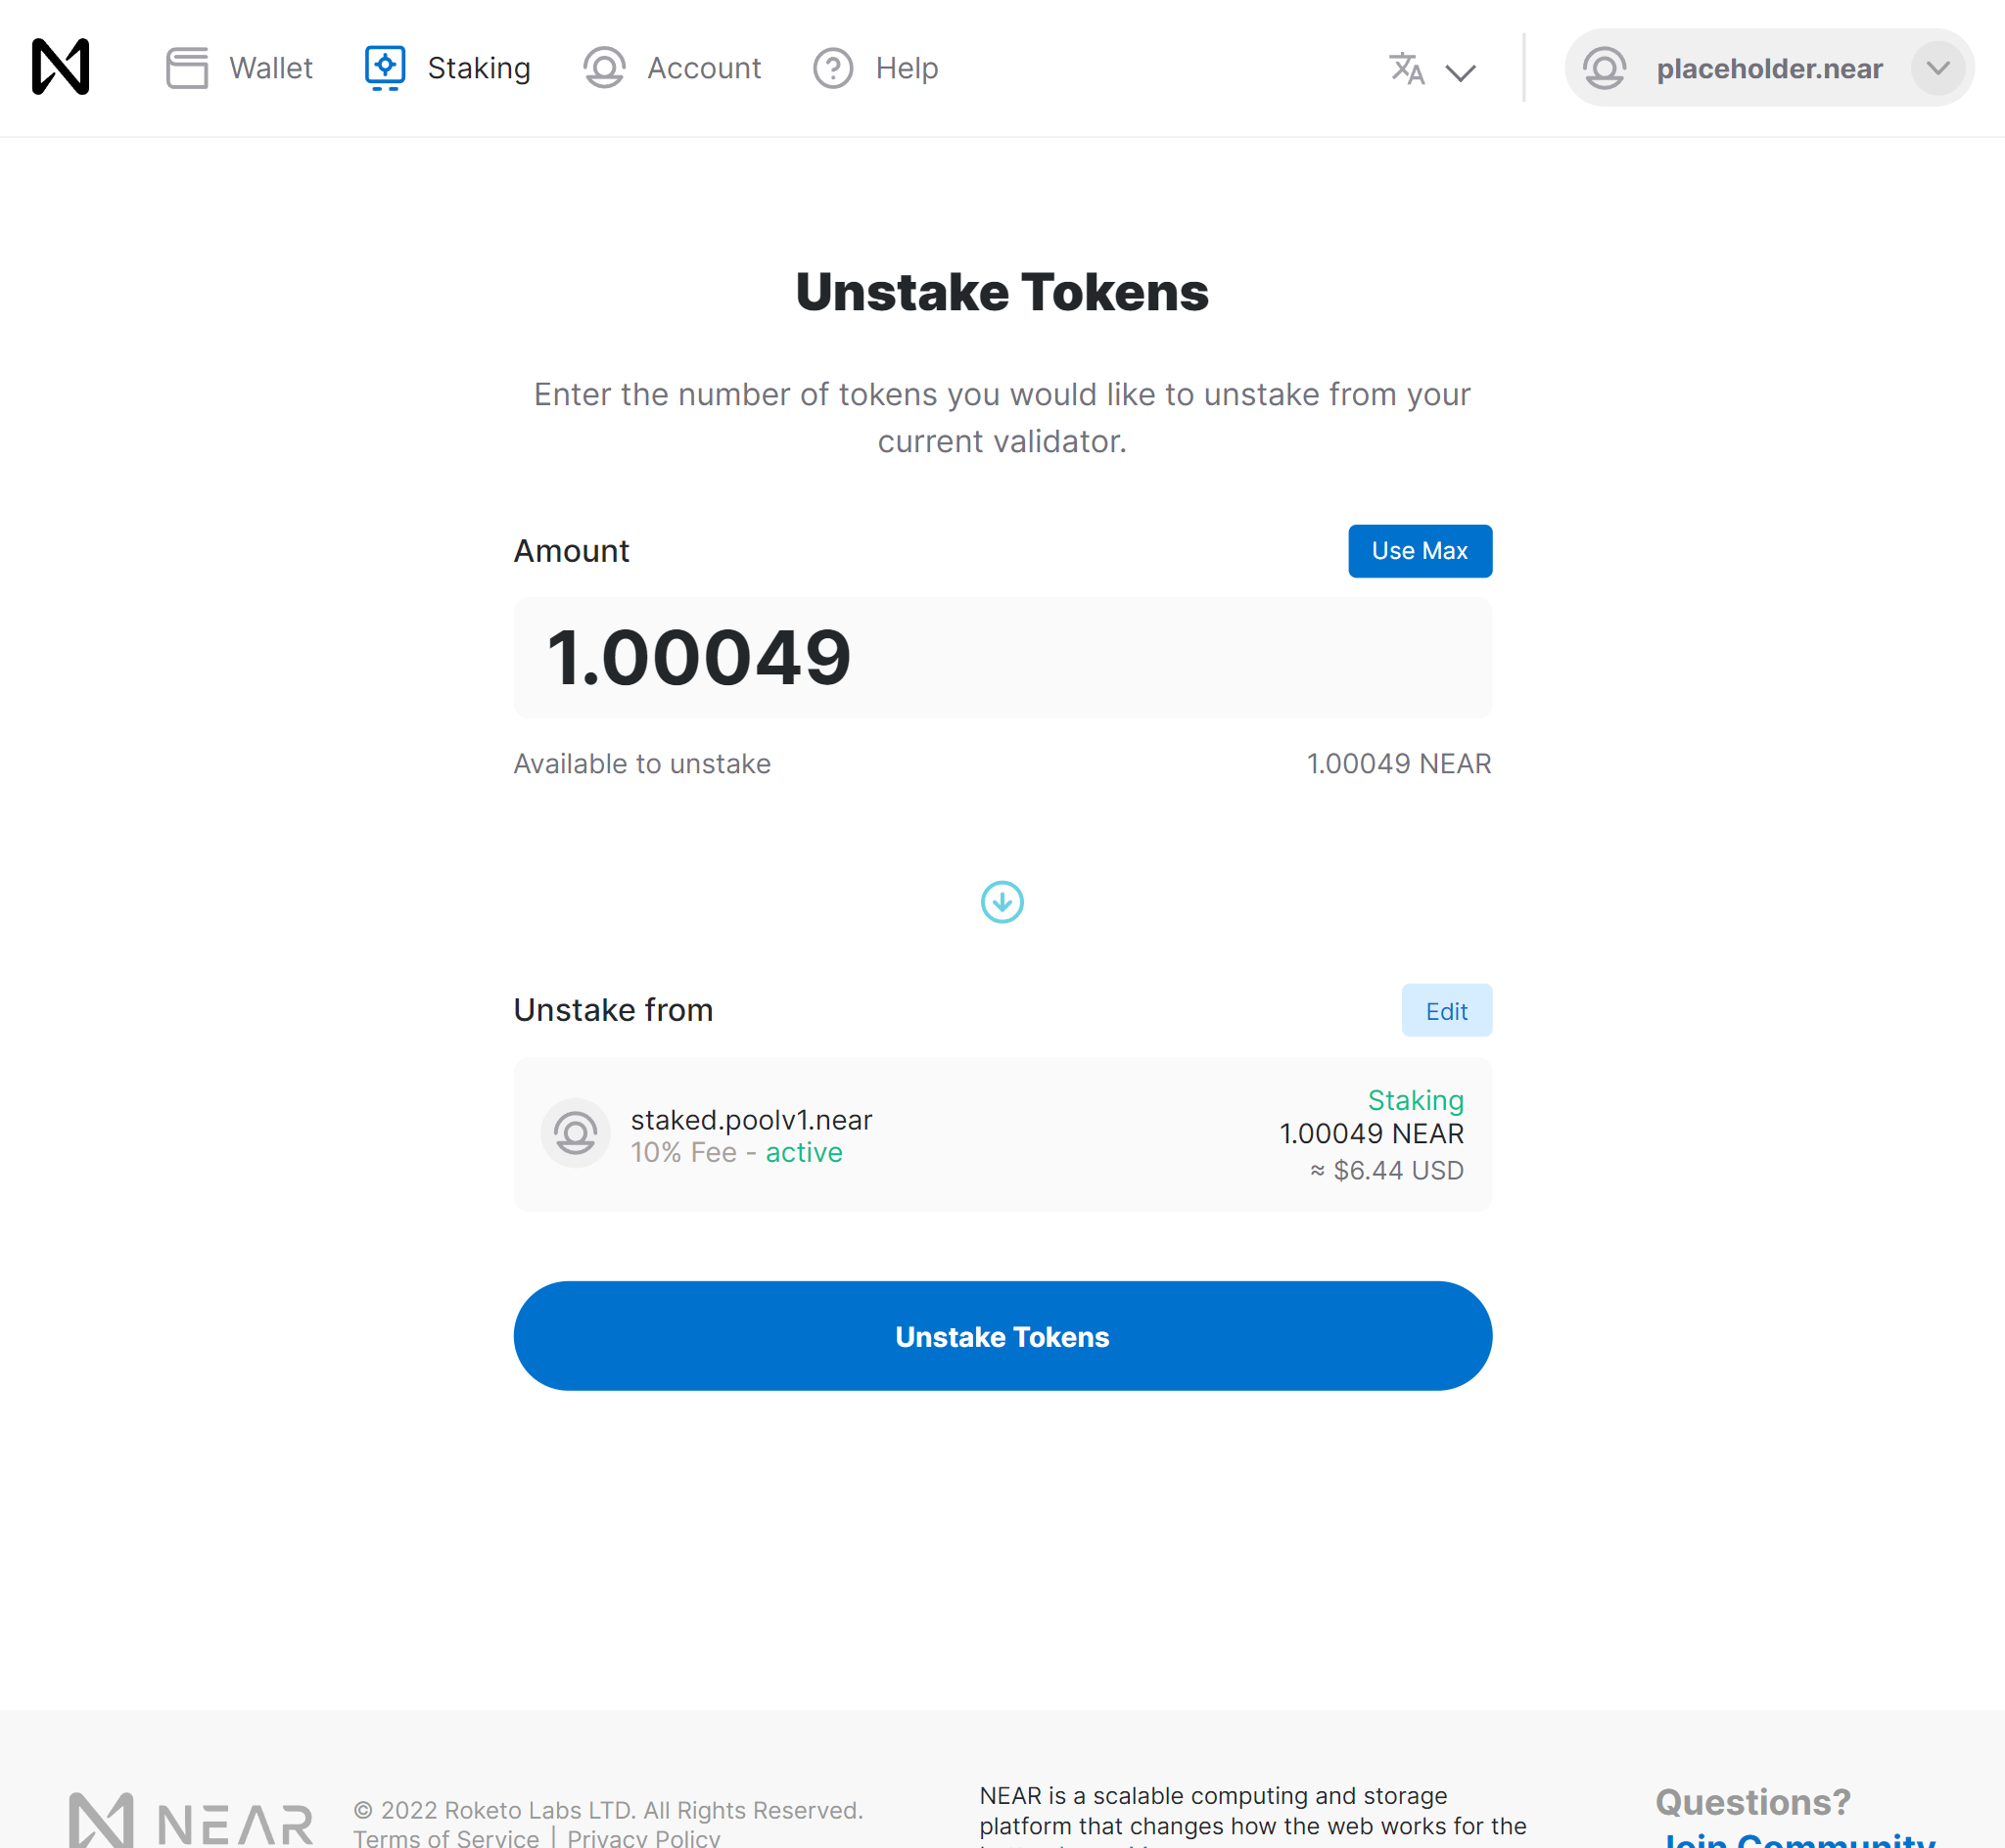 Unstake tokens page